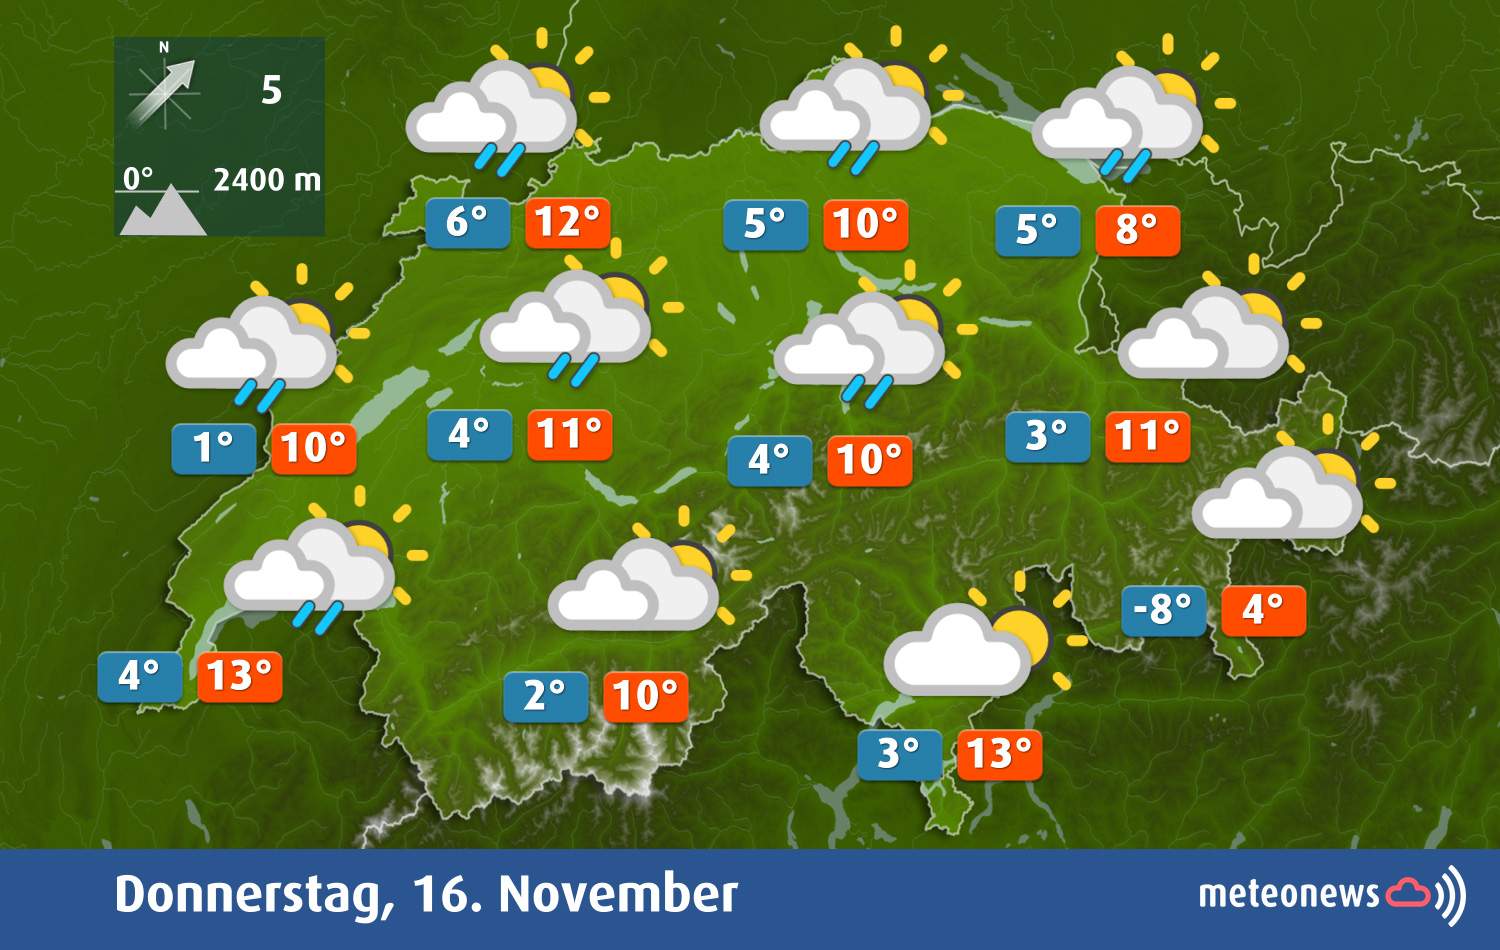 Fig. 1: Weather tomorrow Thursday: Lots of clouds and some rain in the north, friendlier in the south; Source: MeteoNews